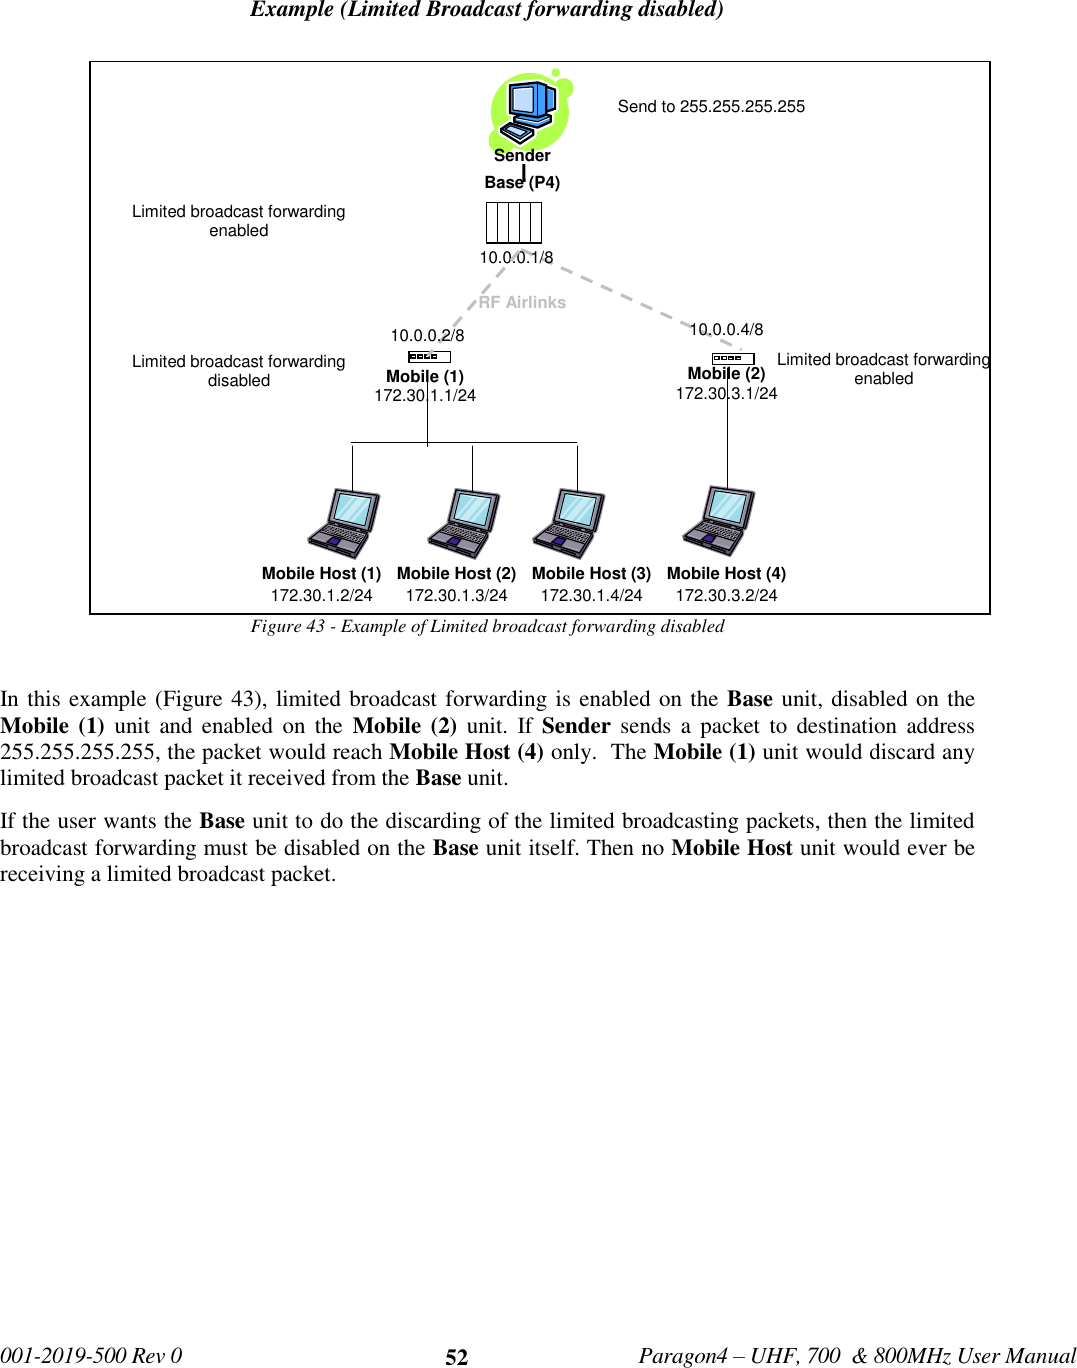   001-2019-500 Rev 0         Paragon4 – UHF, 700  &amp; 800MHz User Manual     52  Example (Limited Broadcast forwarding disabled)  Figure 43 - Example of Limited broadcast forwarding disabled  In this example (Figure 43), limited broadcast forwarding is enabled on the Base unit, disabled on the Mobile (1)  unit  and  enabled  on  the  Mobile (2)  unit.  If  Sender  sends  a packet  to  destination  address 255.255.255.255, the packet would reach Mobile Host (4) only.  The Mobile (1) unit would discard any limited broadcast packet it received from the Base unit.   If the user wants the Base unit to do the discarding of the limited broadcasting packets, then the limited broadcast forwarding must be disabled on the Base unit itself. Then no Mobile Host unit would ever be receiving a limited broadcast packet.       Base (P4) RF Airlinks Mobile Host (2) 172.30.1.3/24 Mobile Host (3) 172.30.1.4/24 Mobile (1) 172.30.1.1/24 Mobile (2) 172.30.3.1/24 Mobile Host (1) 172.30.1.2/24 Mobile Host (4) 172.30.3.2/24 10.0.0.1/8 10.0.0.4/8 Limited broadcast forwarding enabled Limited broadcast forwarding disabled Send to 255.255.255.255 Limited broadcast forwarding enabled Sender  10.0.0.2/8 